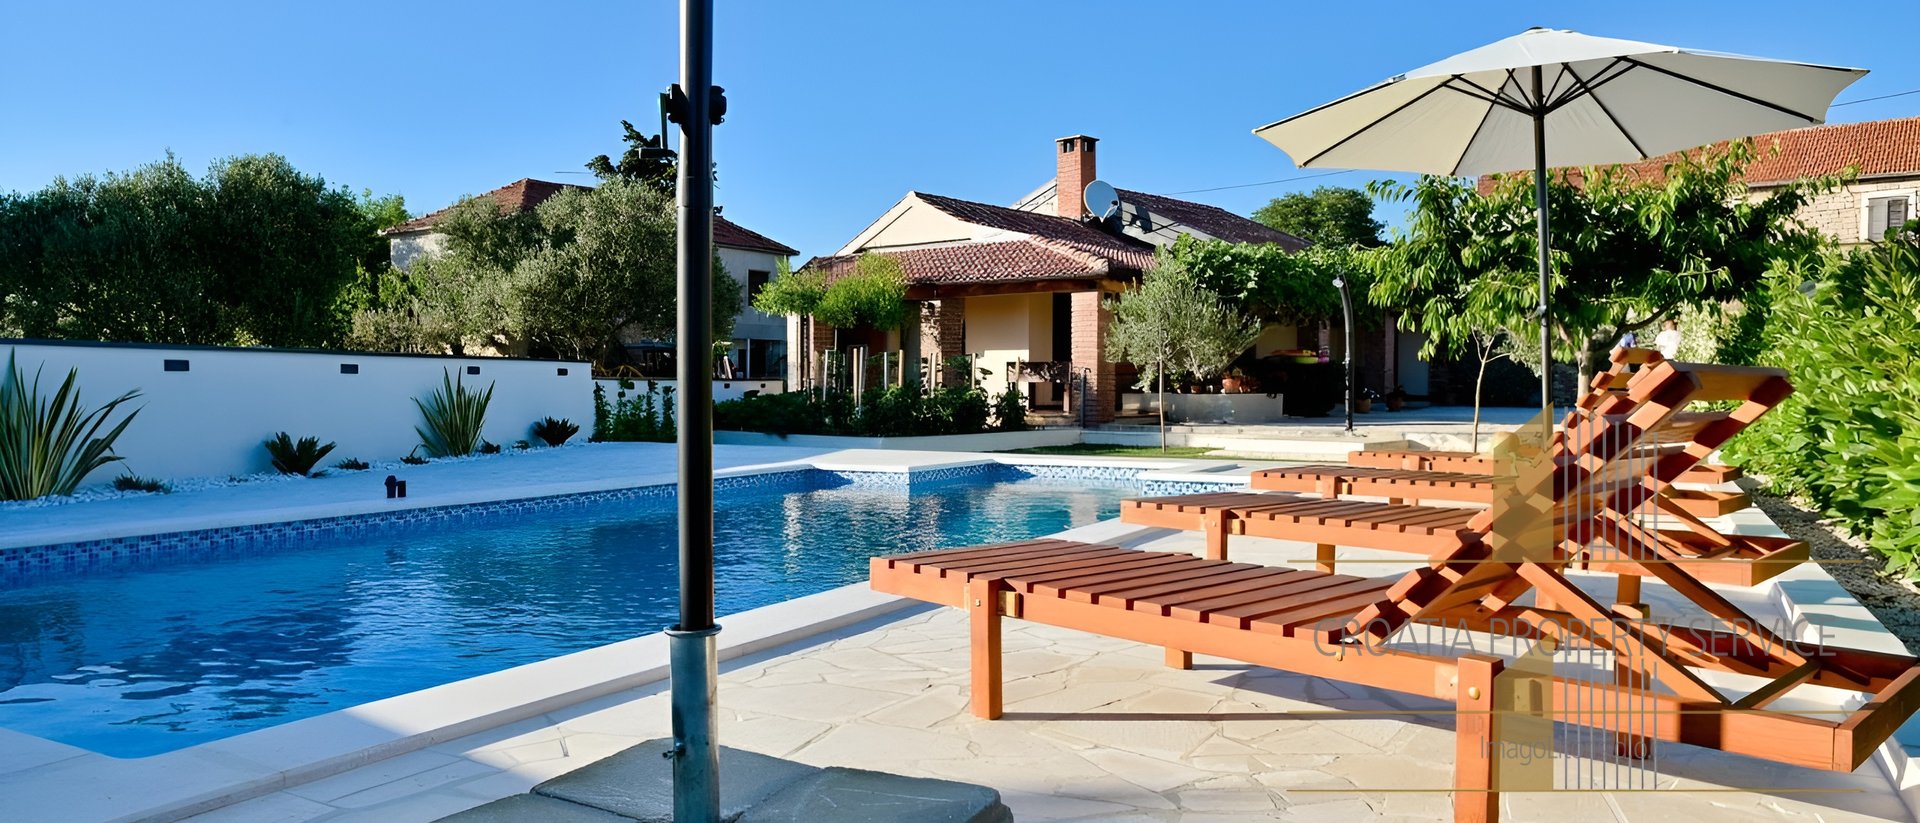 A beautiful house with a swimming pool in the vicinity of Zadar!